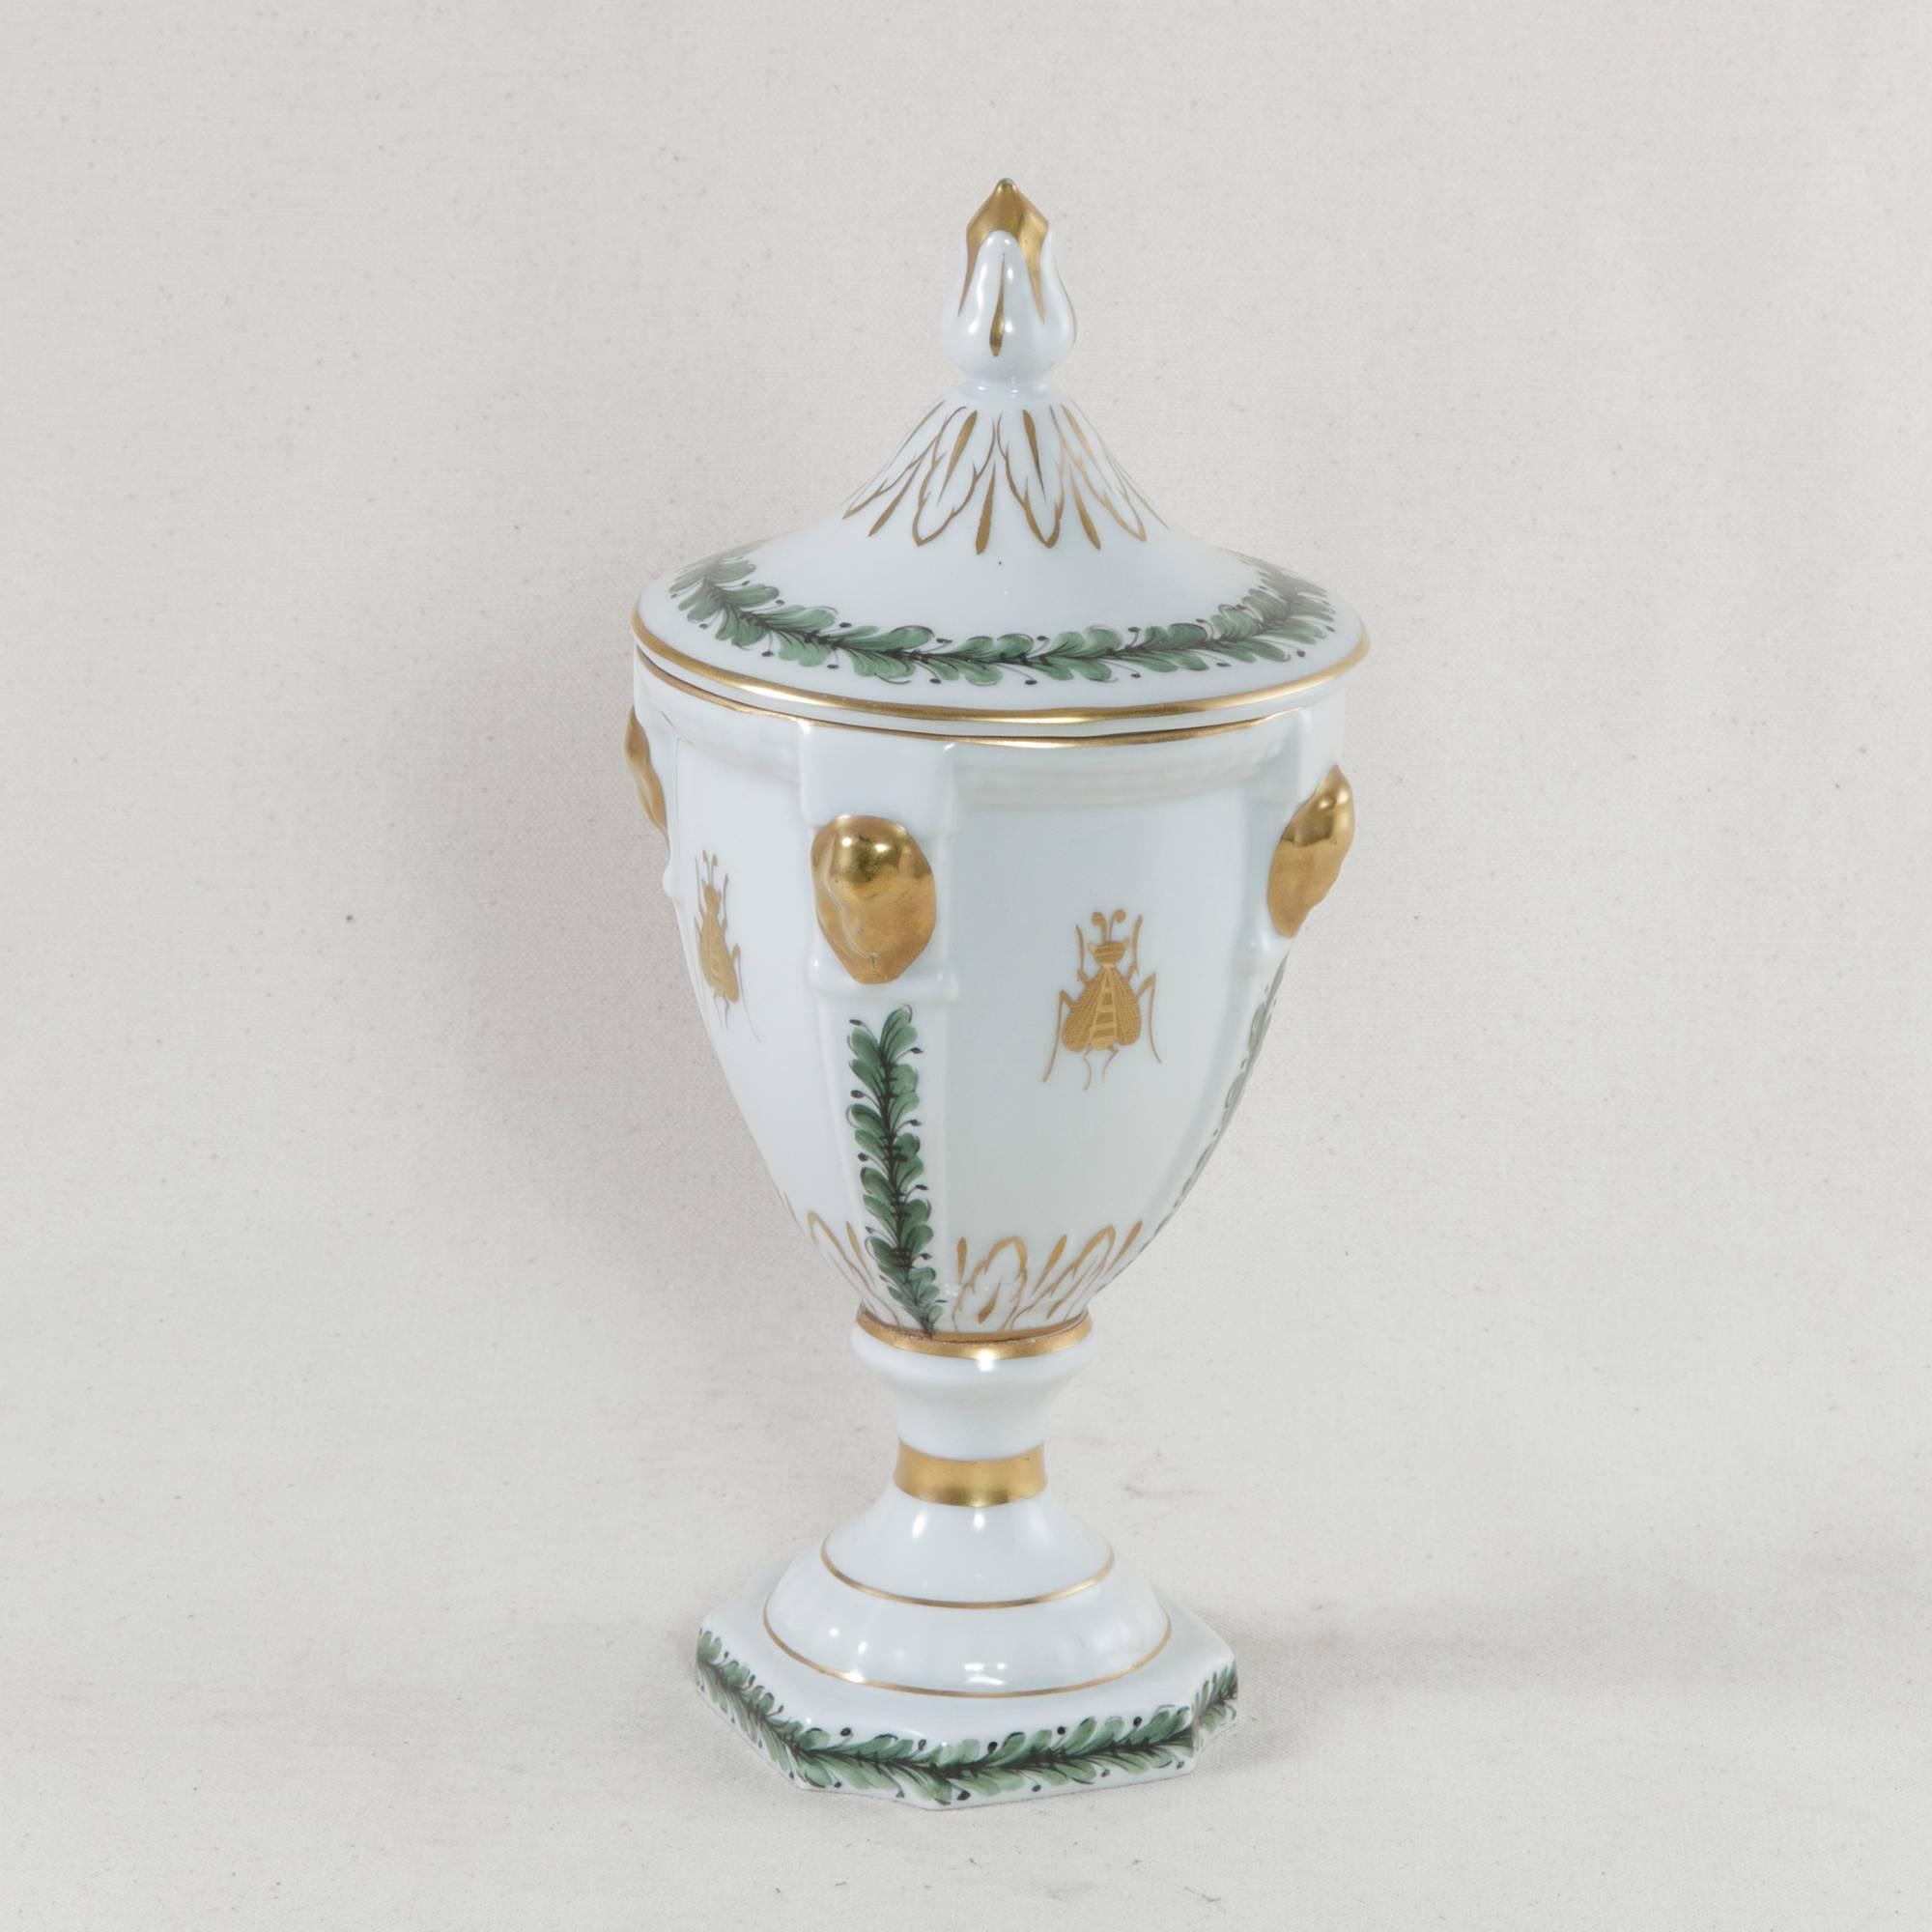 This 19th century French porcelain urn with lid features hand-painted Napoleonic motifs, notably the Napoleonic bee, a symbol chosen by the French emperor himself to signify unity, immortality, and resurrection. Further detailing of gold lines and